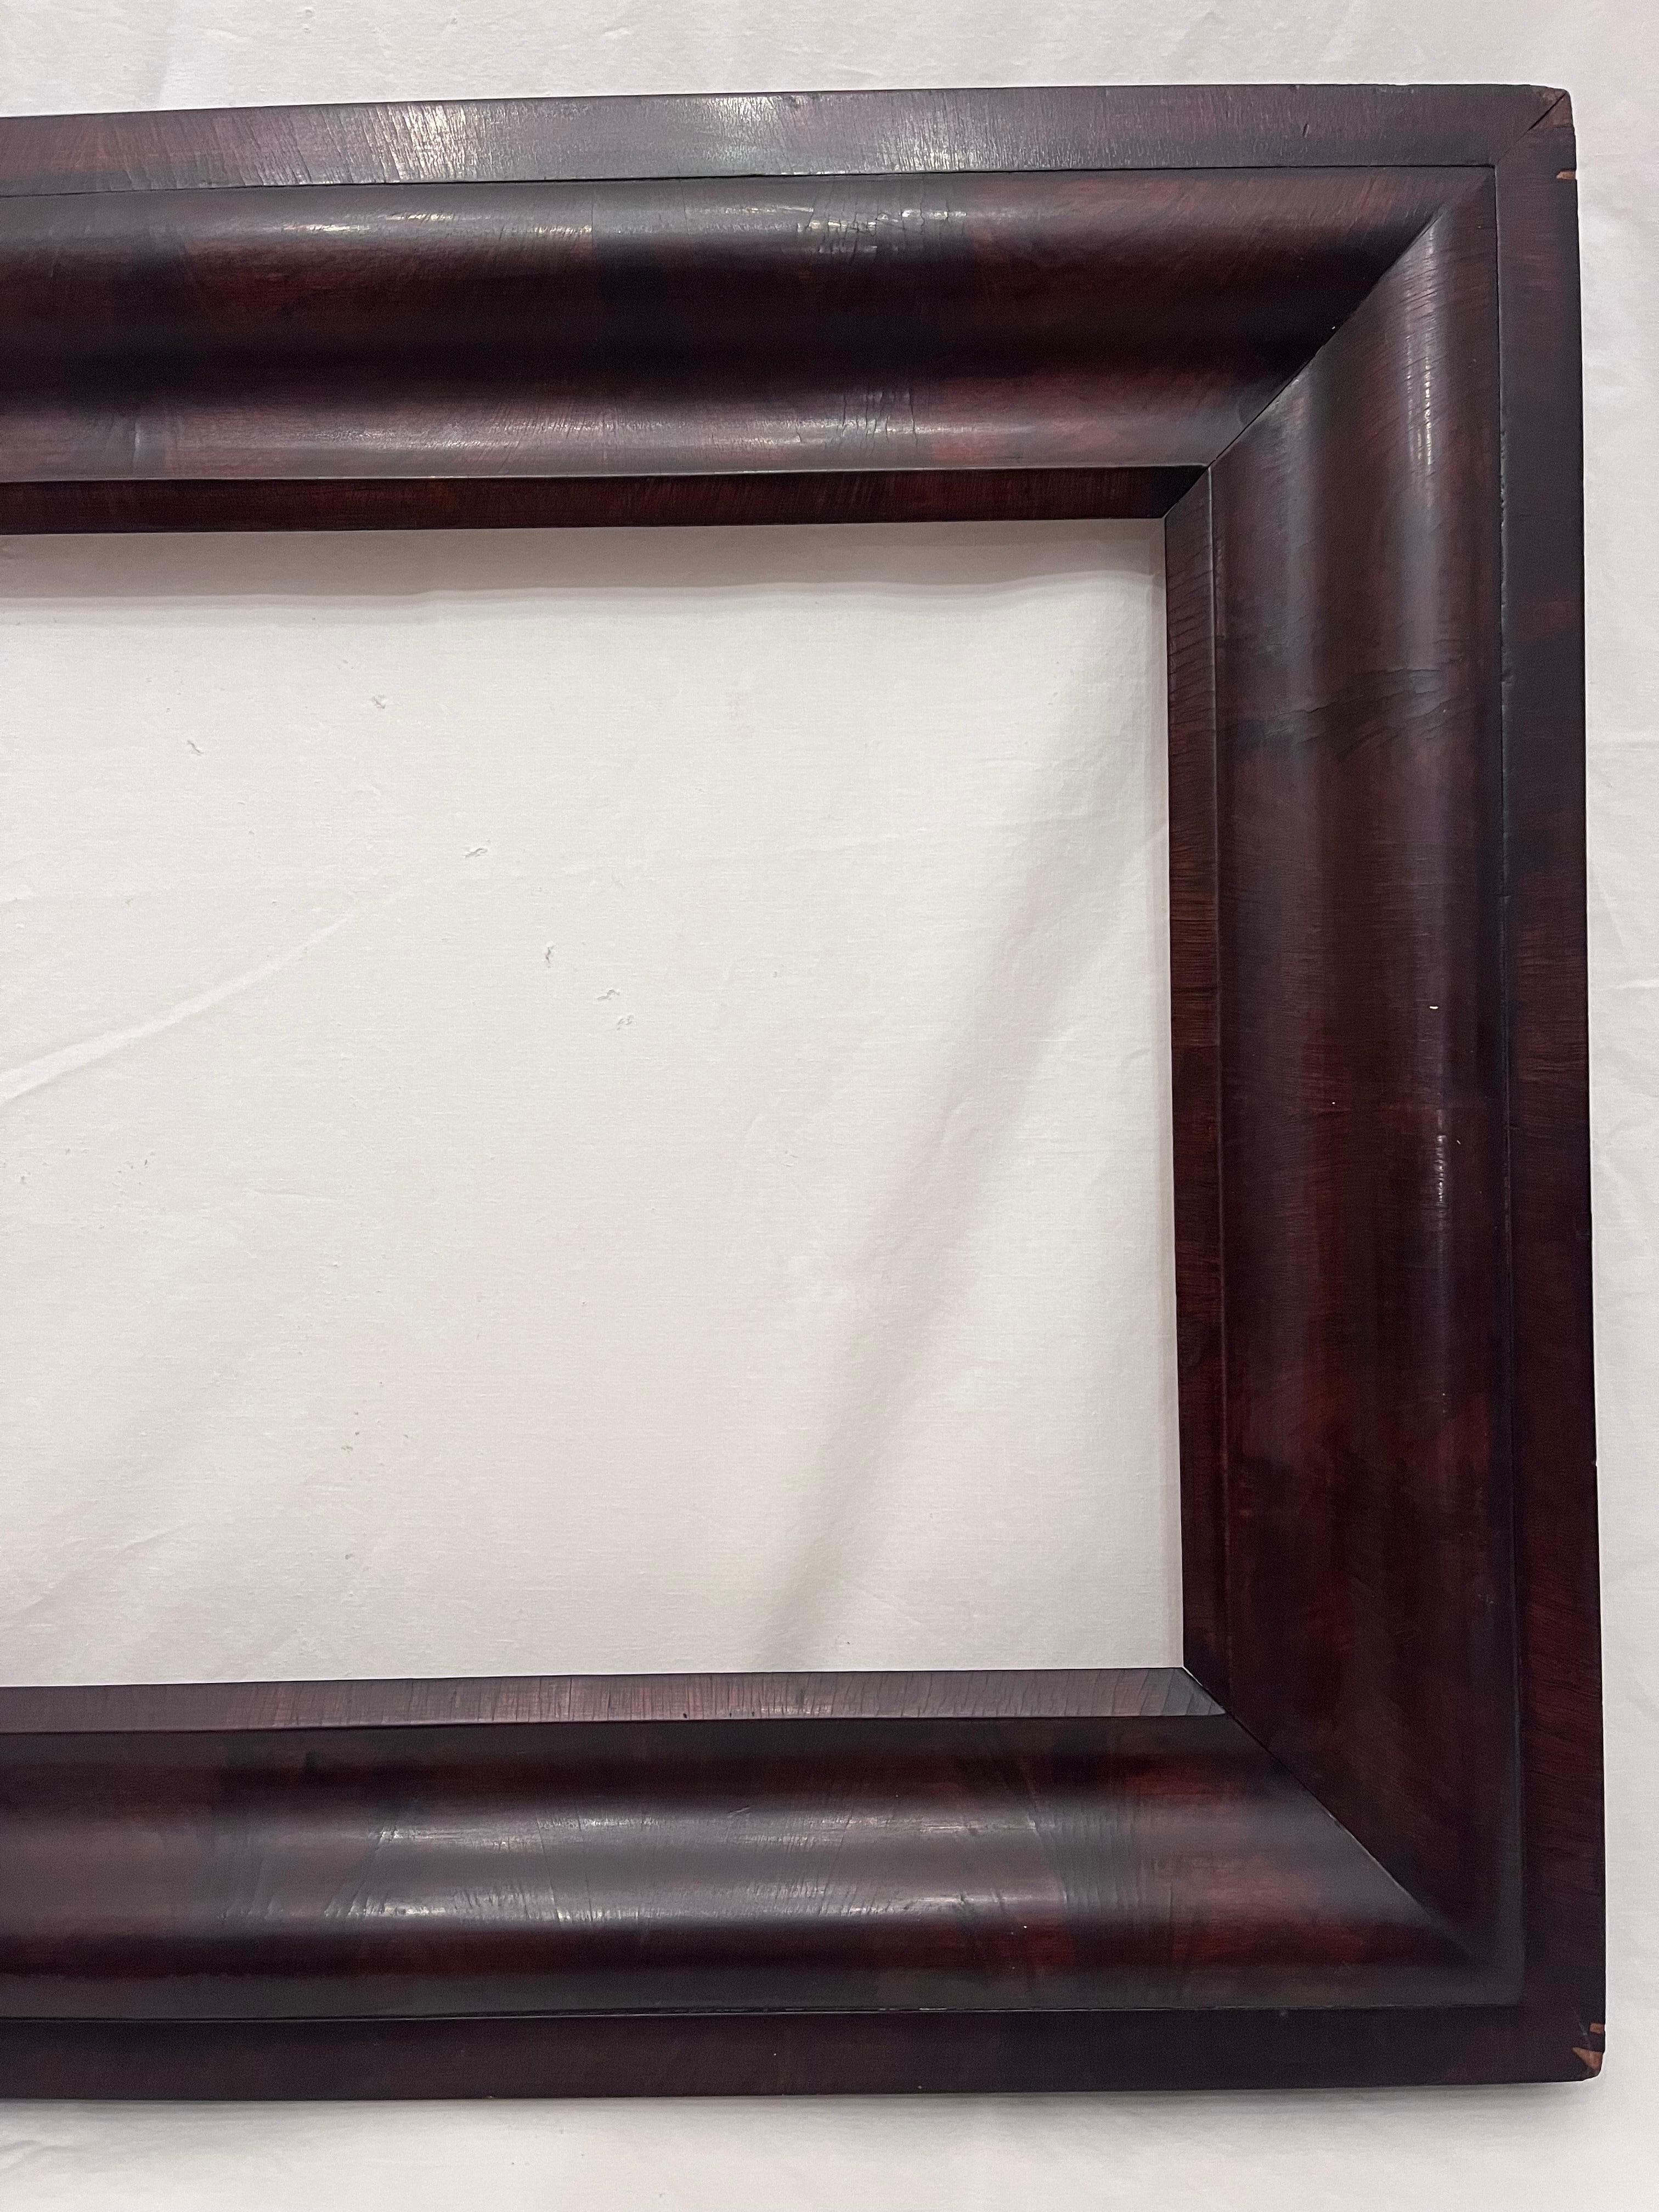 Antique 19th Century American Empire Style Large Picture Mirror Frame 22 x 13 For Sale 1